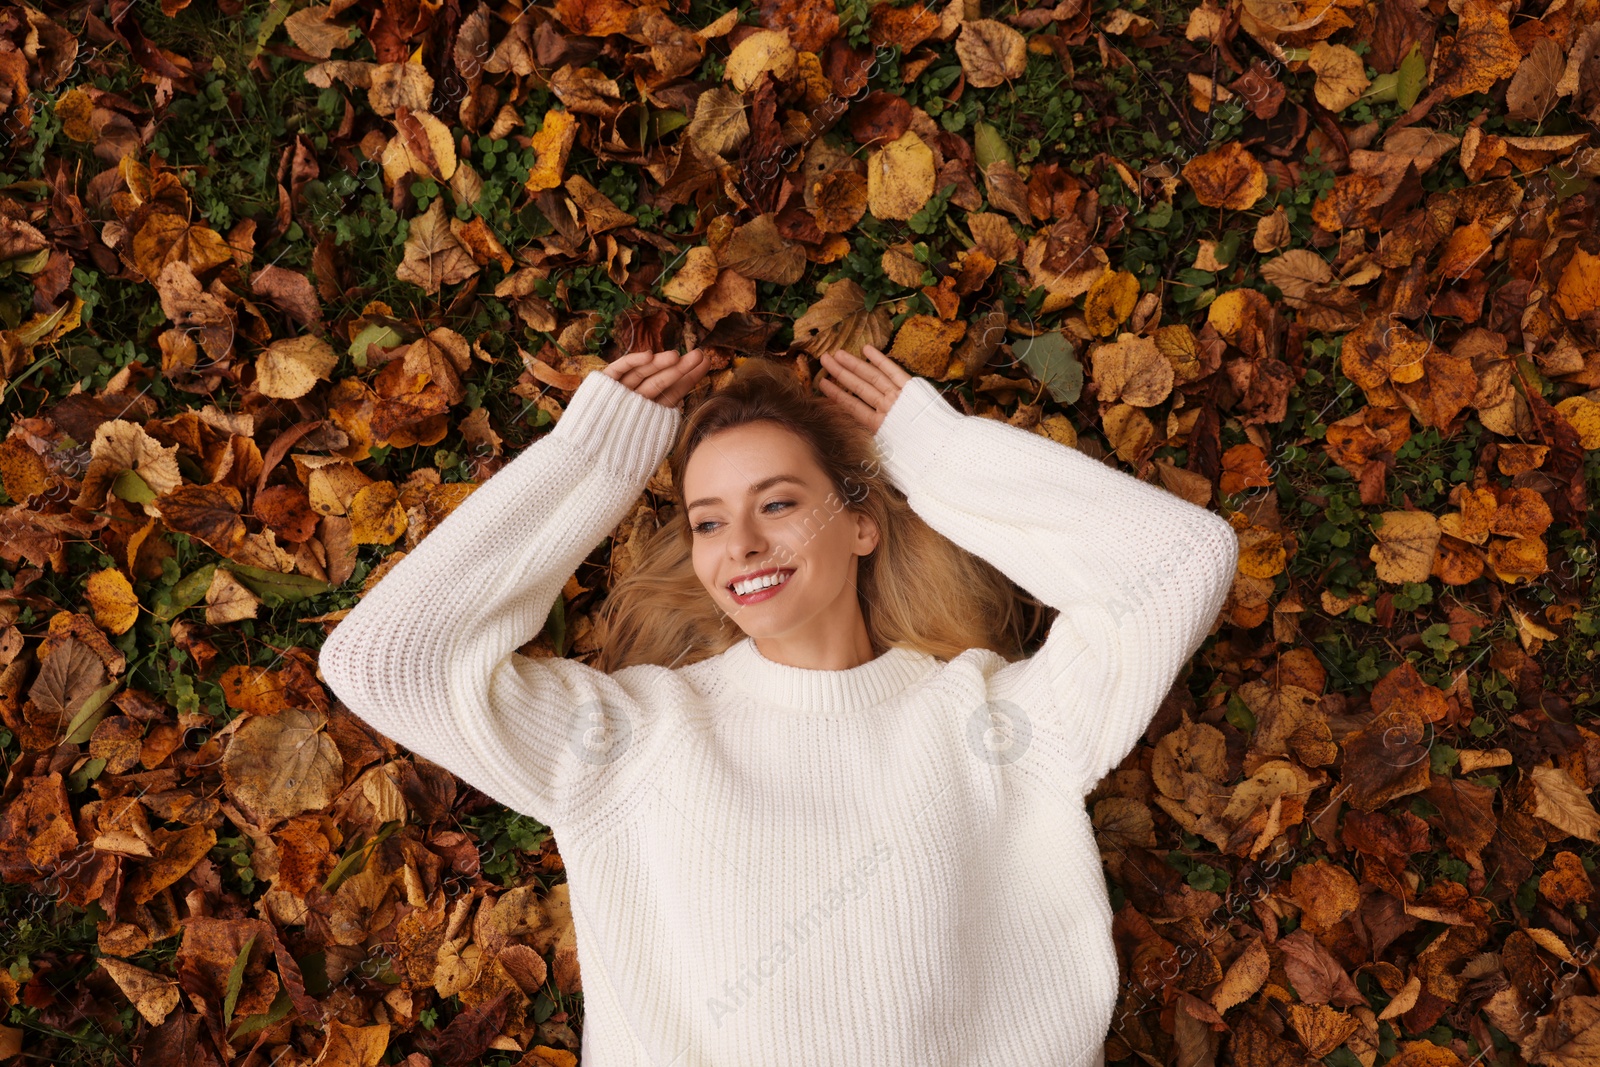 Photo of Smiling woman lying among autumn leaves outdoors, top view